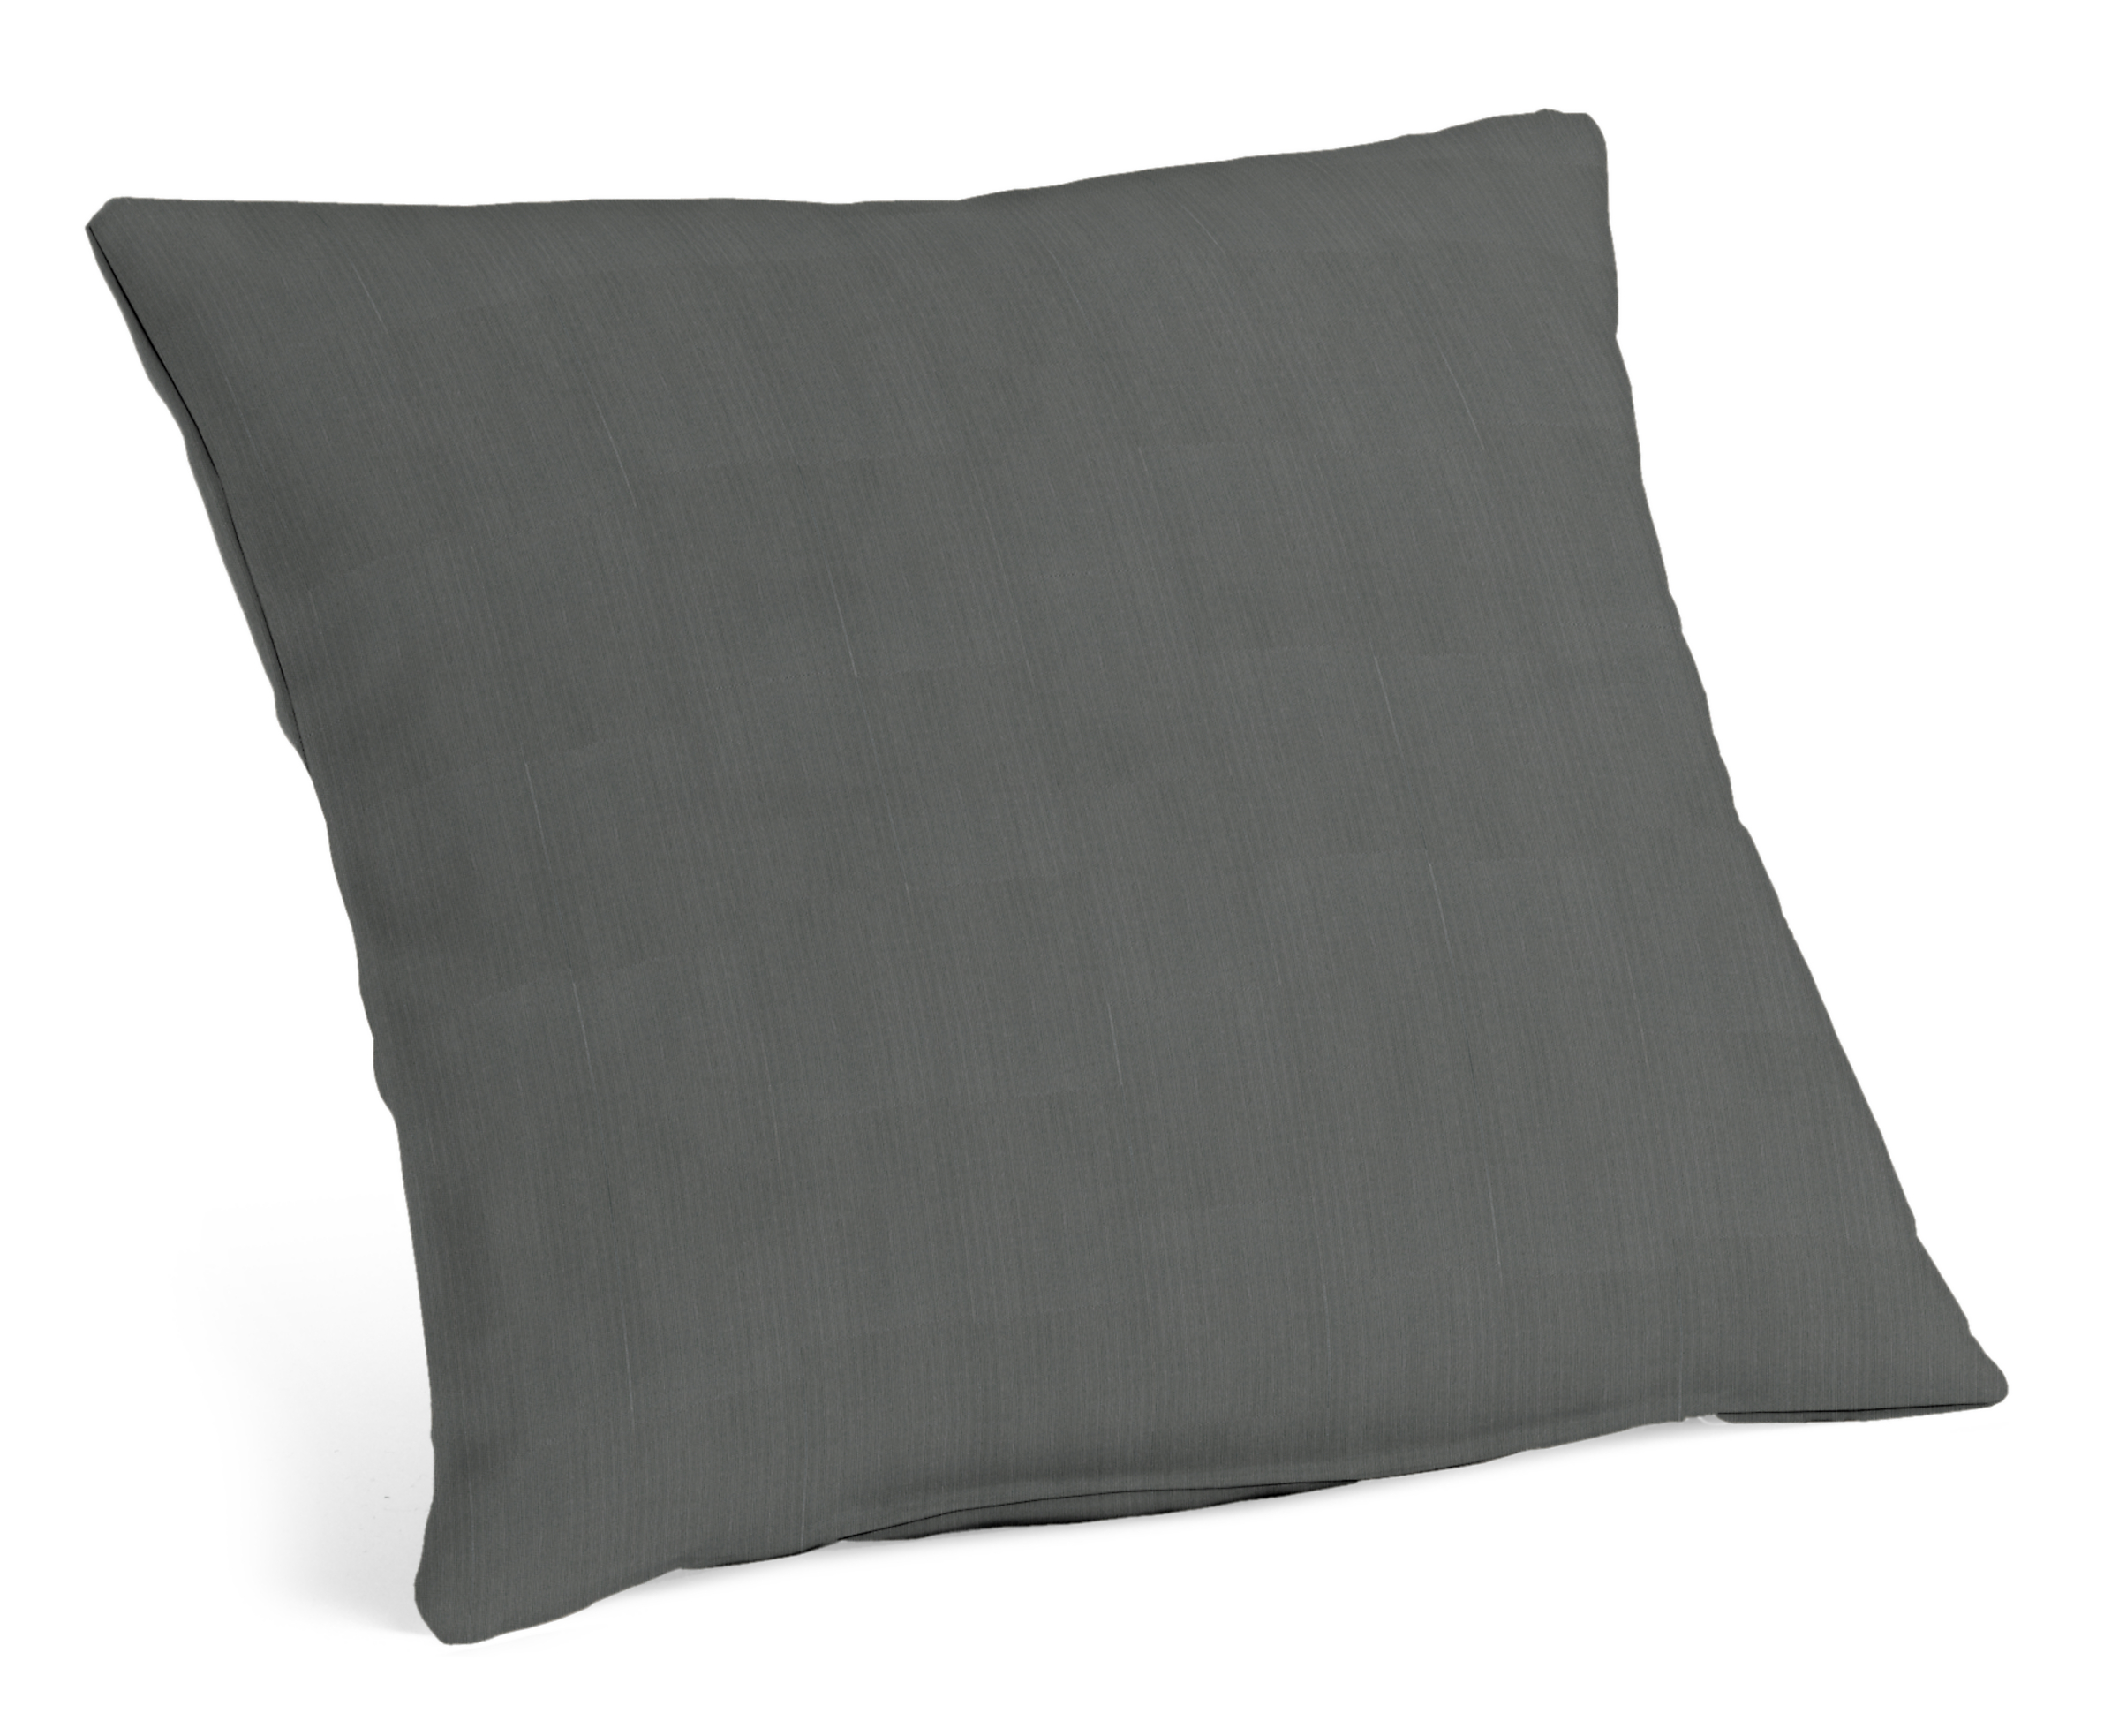 Hue 20w 20h Outdoor Pillow in Sunbrella Canvas Charcoal